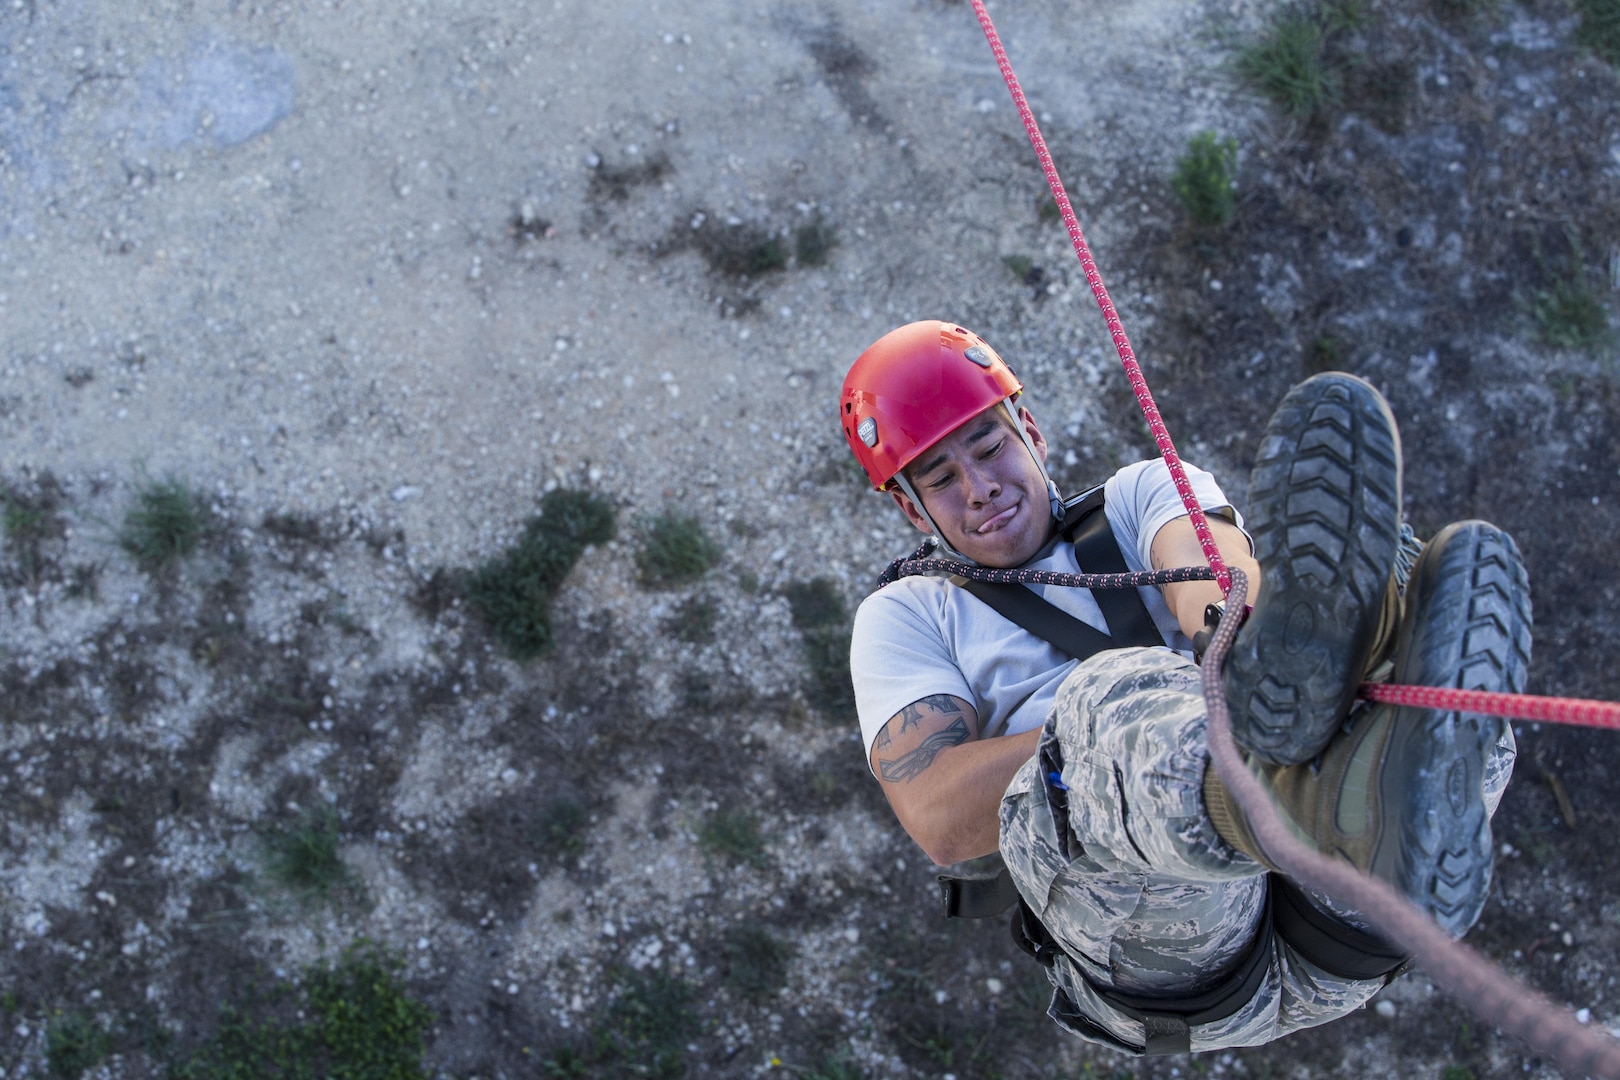 Senior Airman Christian Torres, 502nd Civil Engineer Squadron firefighter, performs an inversion technique during the repelling demonstration portion of the 2015 Battle of the Badges Sept. 12 at the Joint Base San Antonio-Randolph Camp Talon Fire Training Area. This year’s Battle of the Badges was comprised of three main events for time: a tactical shooting challenge, firefighter combat challenge and fire truck pull. In addition the traditional challenges, this year’s event gave both defenders and firefighters the opportunity to show case parts of their missions with repelling, military working dog and Taser demonstrations.